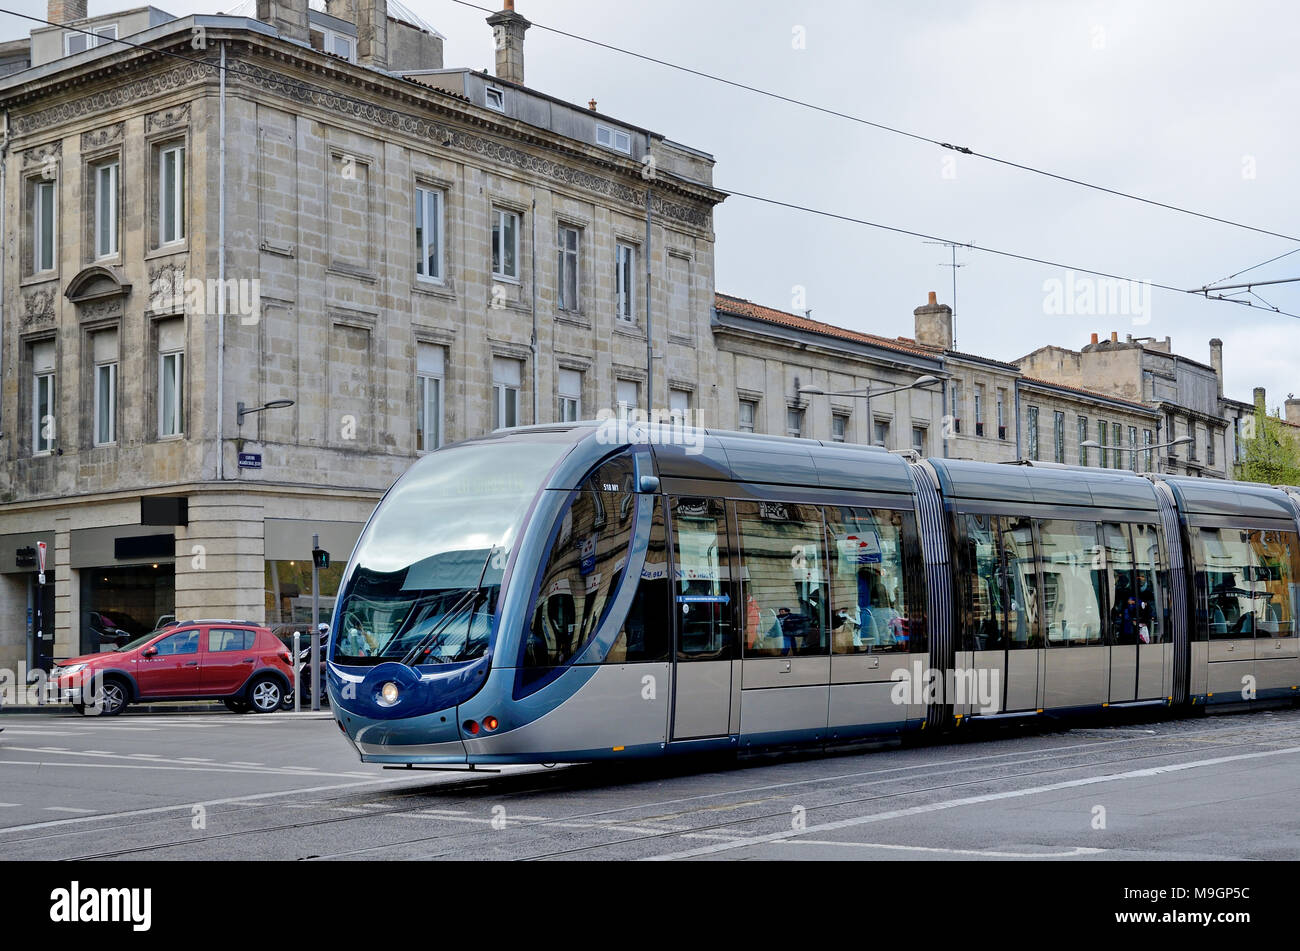 Modern tramcar of the Bordeaux tram system Stock Photo